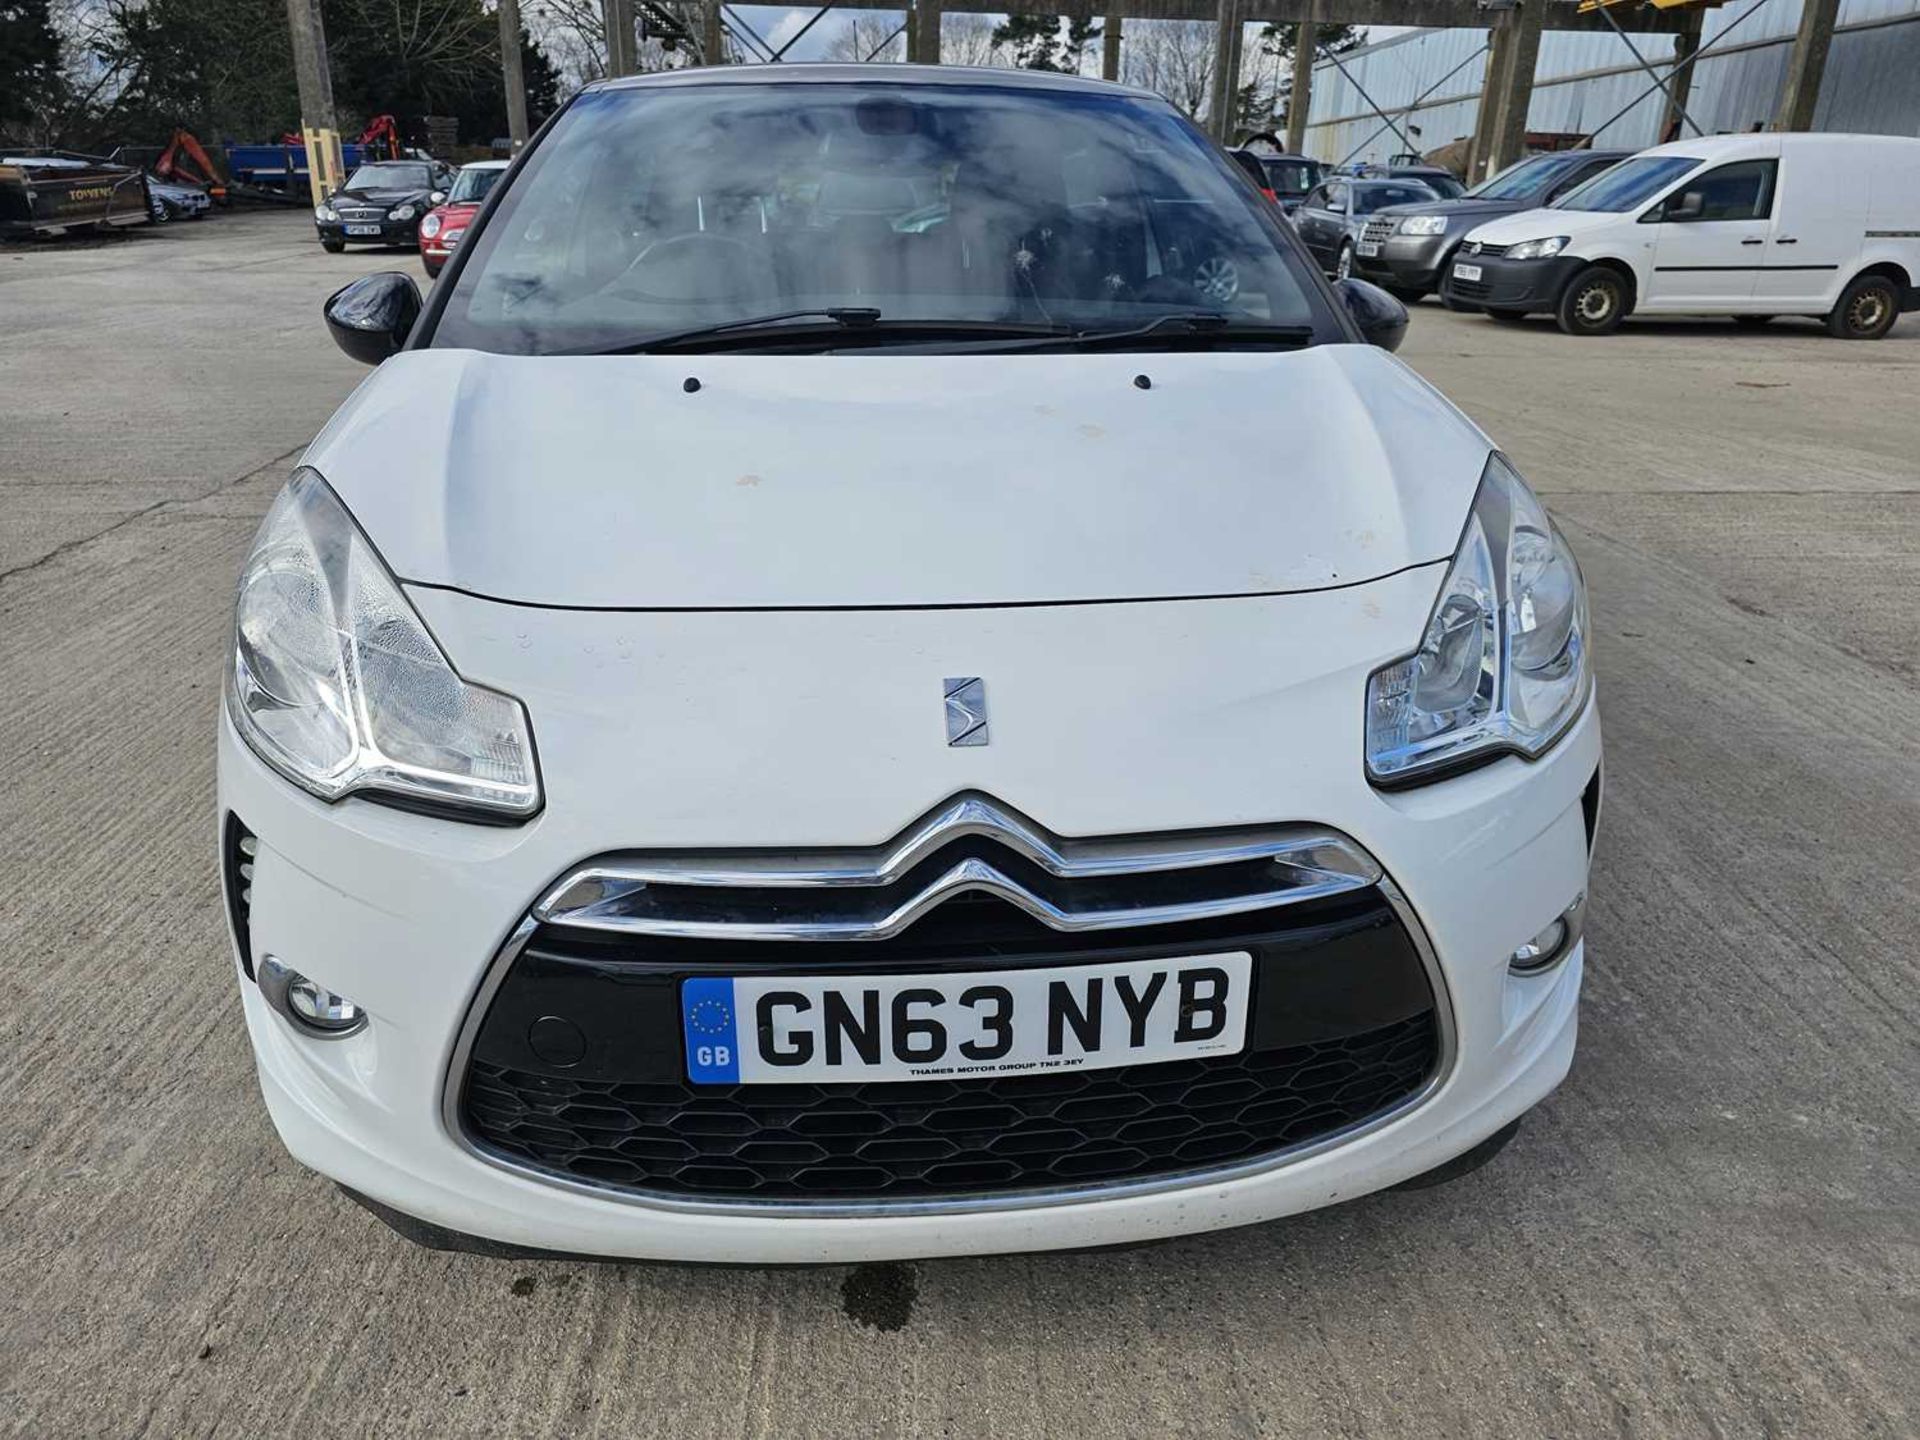 2013 Citroen DS3, 5 Speed, A/C (Reg. Docs. Available) - Image 2 of 29